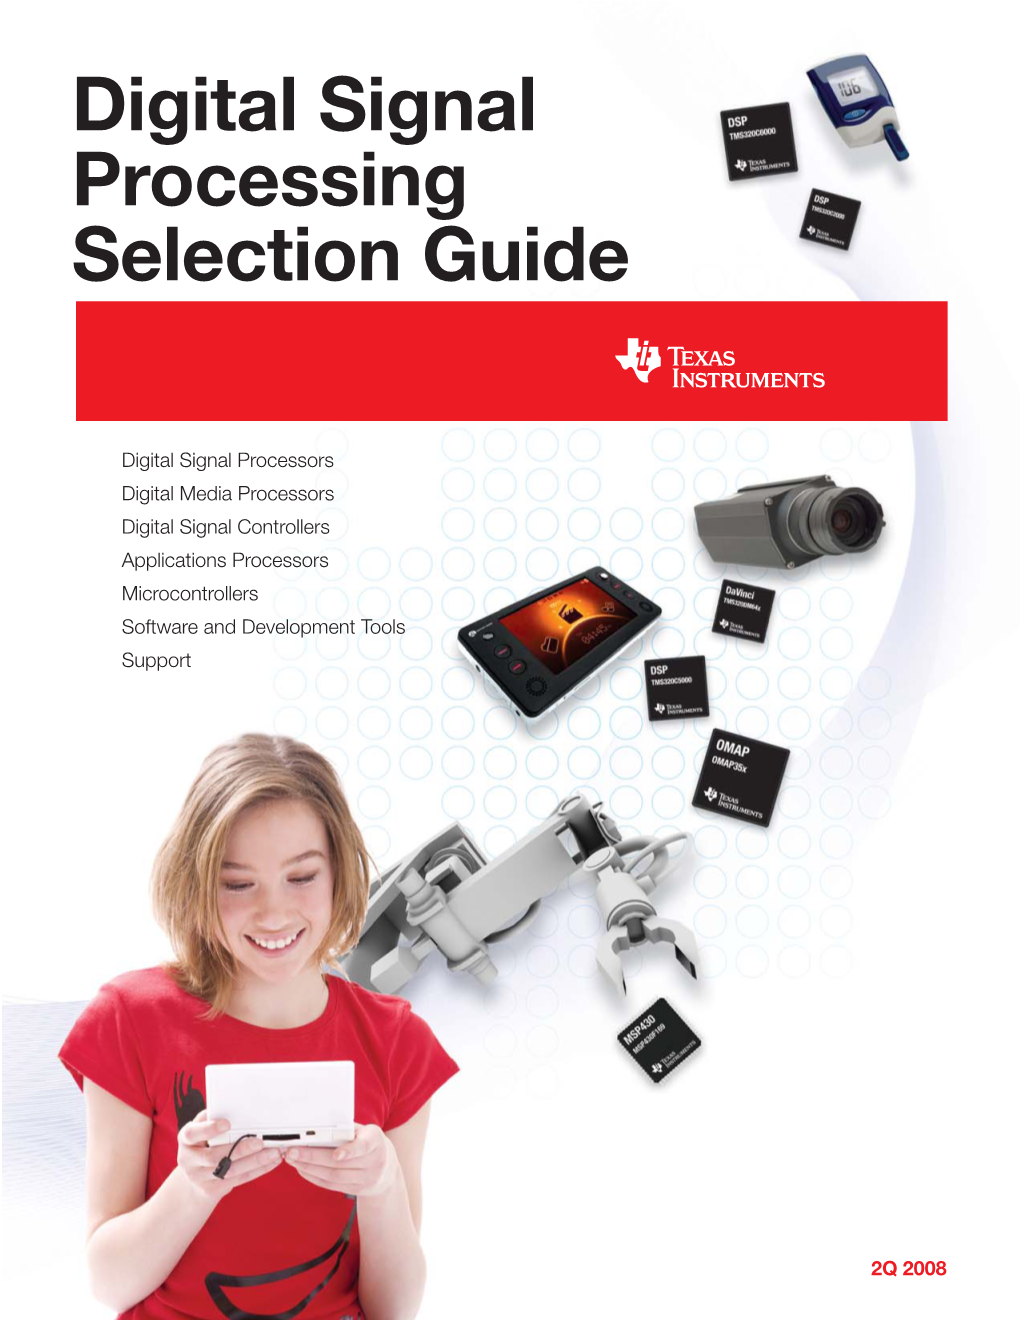 Digital Signal Processing Selection Guide